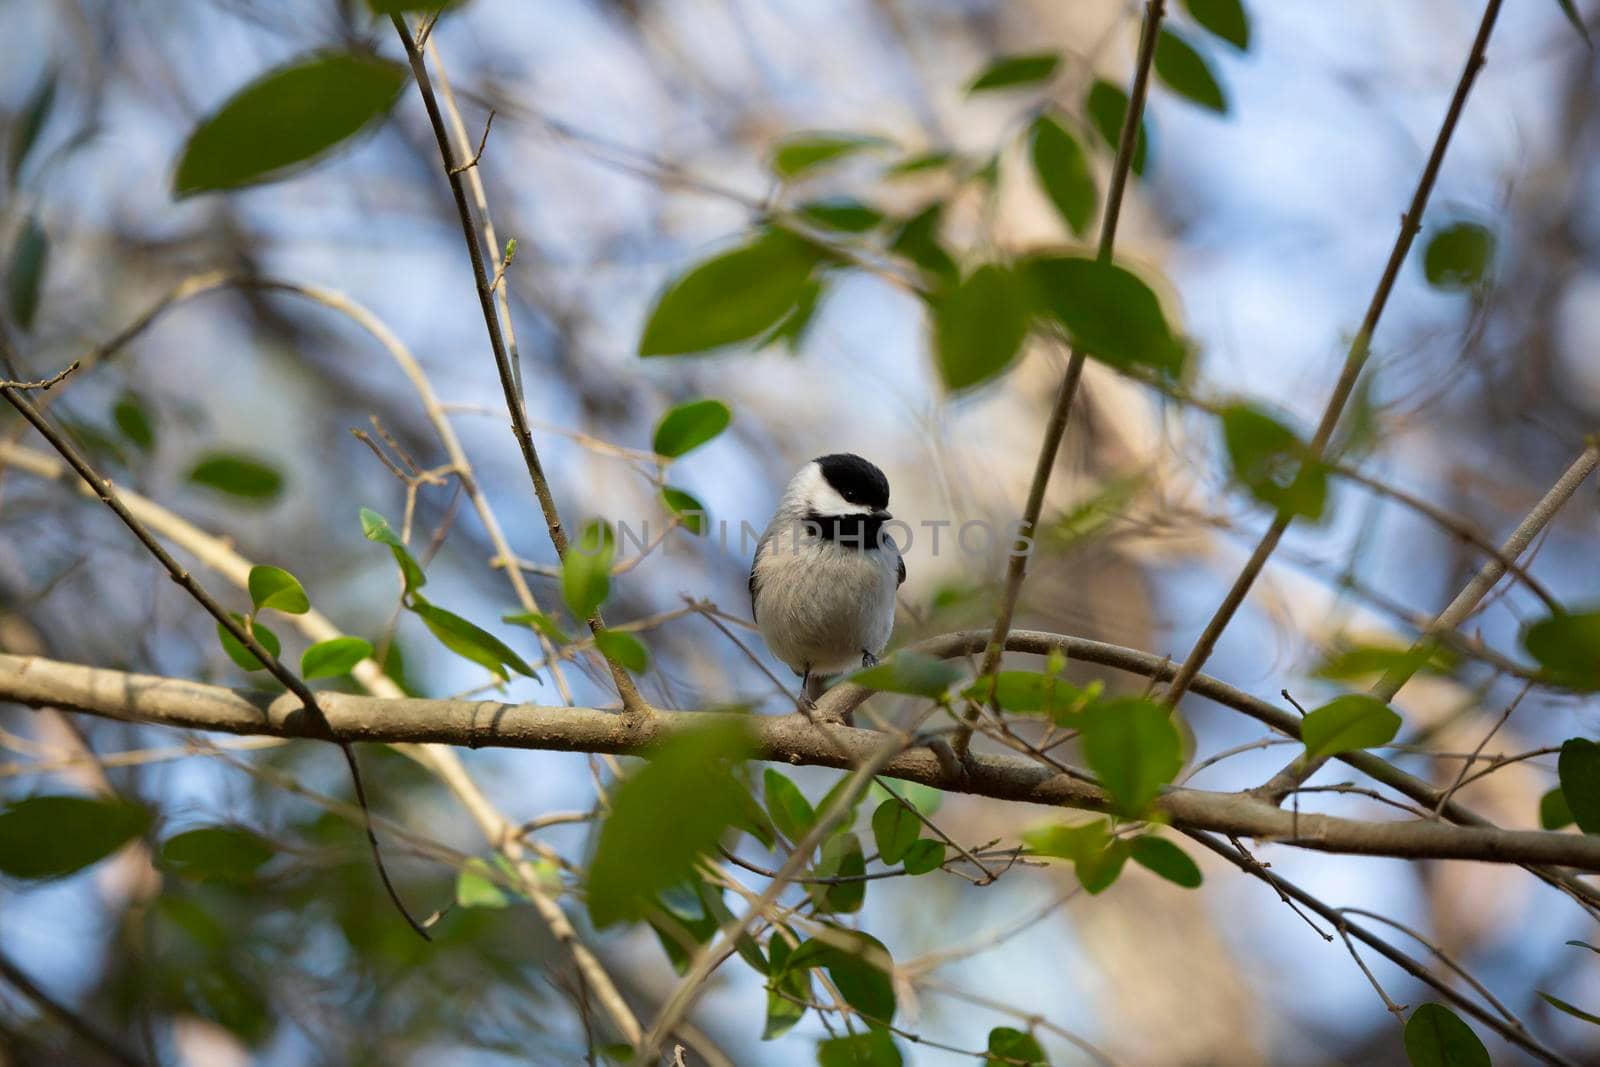 Black-capped chickadee (Poecile atricapillus) foraging for food on a bush branch